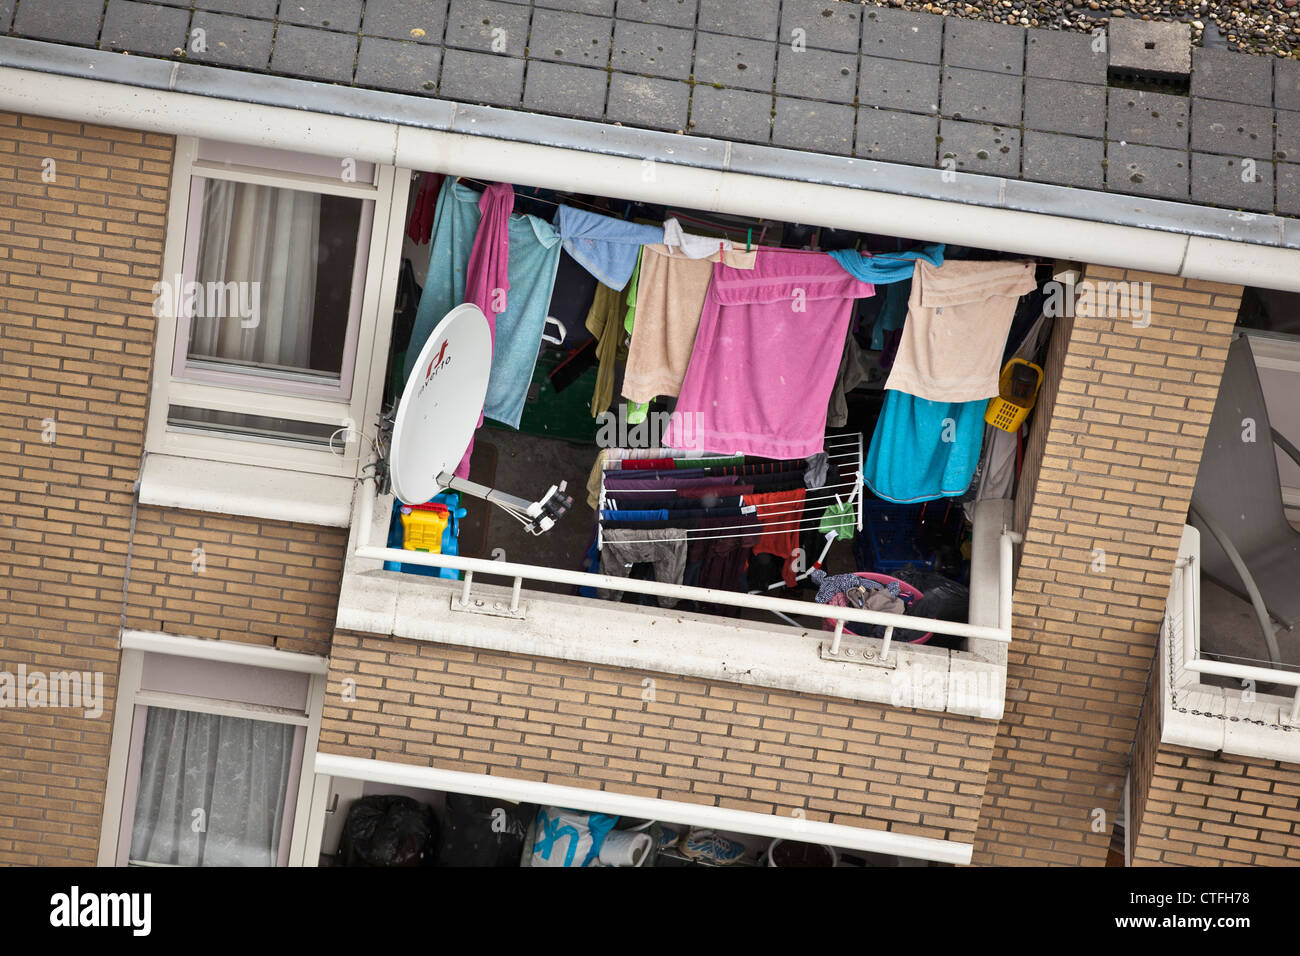 The Netherlands, Den Haag, The Hague, Residential district. Satellite dish. Drying clothes in window. Stock Photo